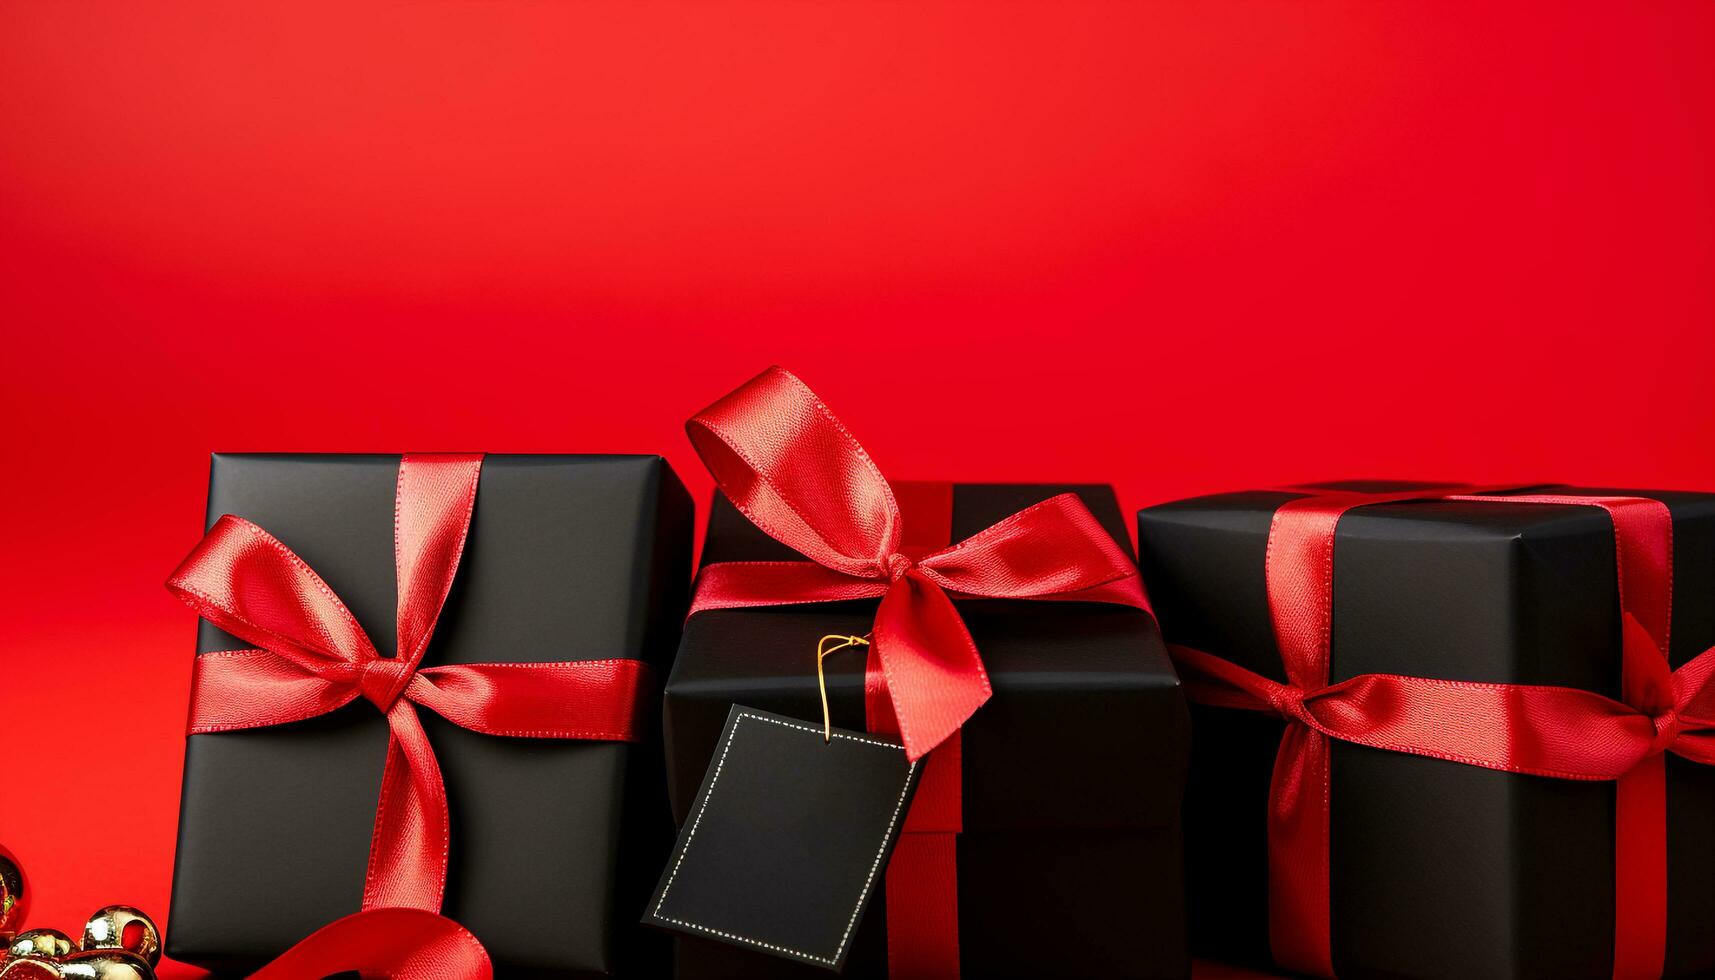 Celebration of love gift box wrapped in shiny red paper generated by AI photo